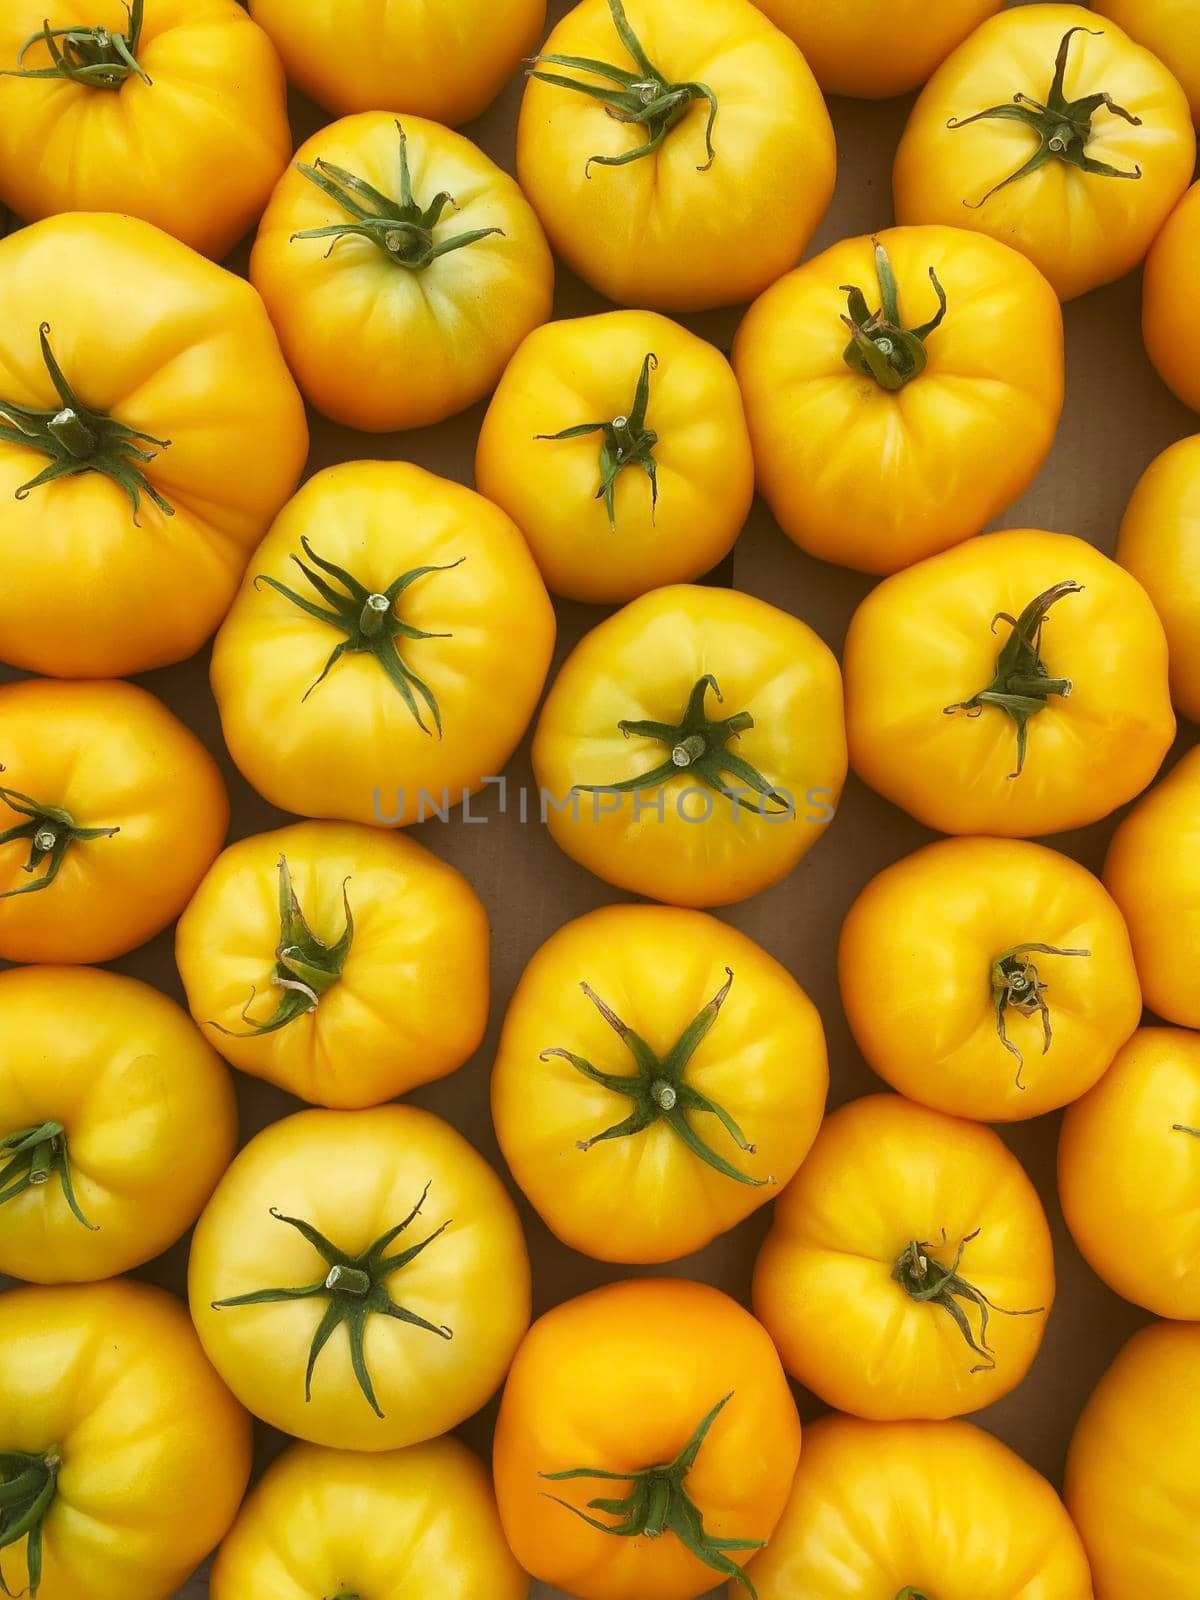 red and yellow tomatoes in boxes at the farmers market.selective focus by mila1784